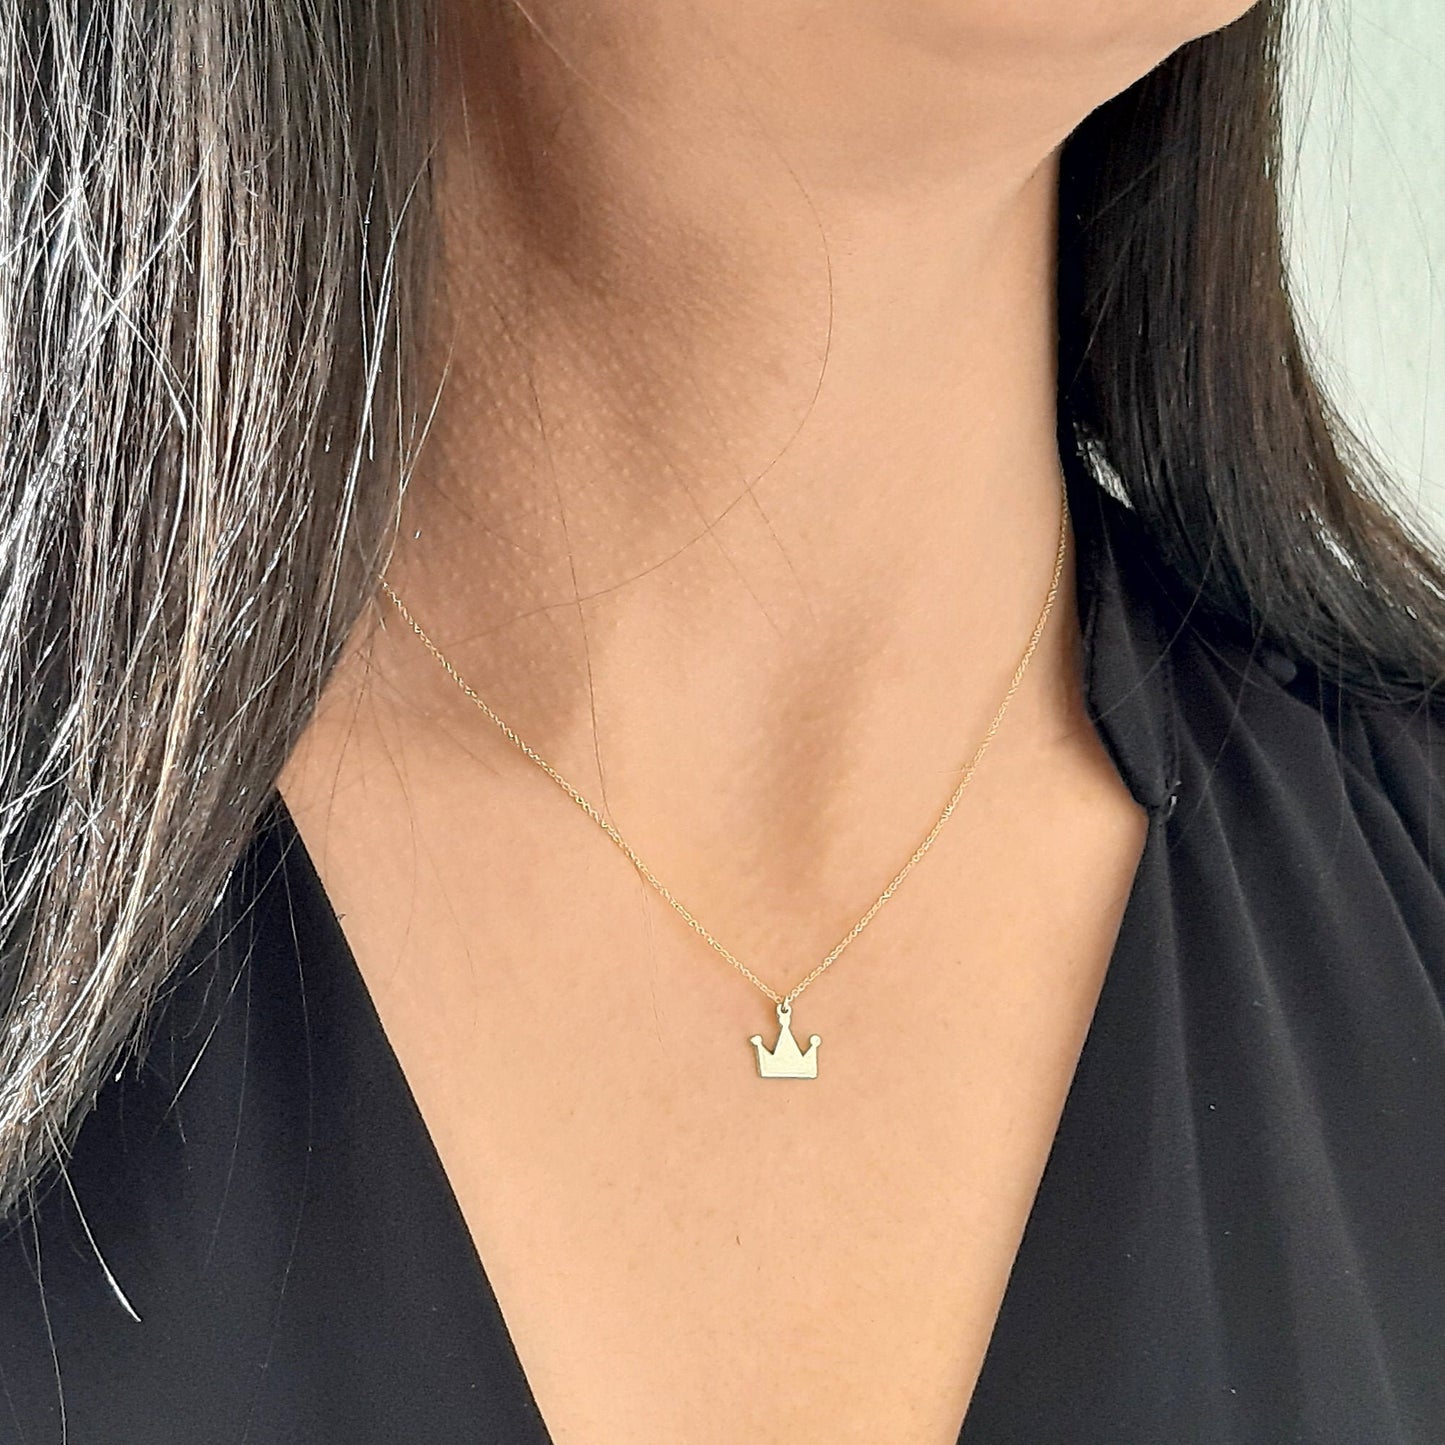 14k solid gold crown necklace , delicate tiny crown charm